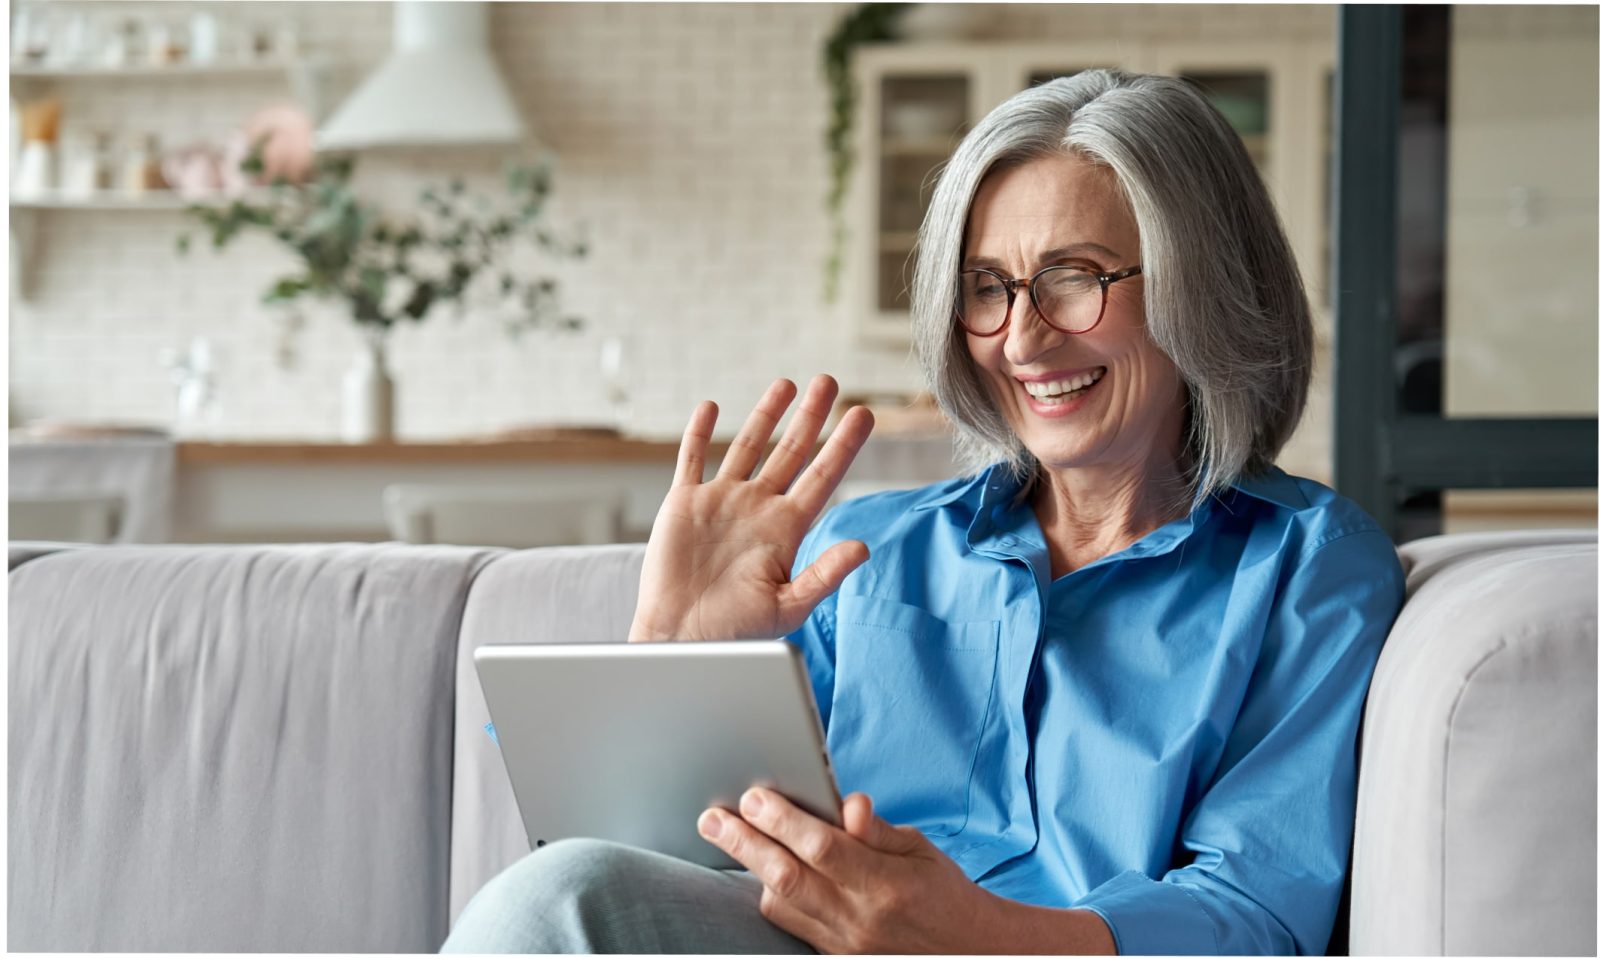 White woman with white hair, wearing brown glasses, a blue shirt, sitting on a gray sofa, while holding a gray tablet with her left hand and waving with her right hand, smiling at the screen